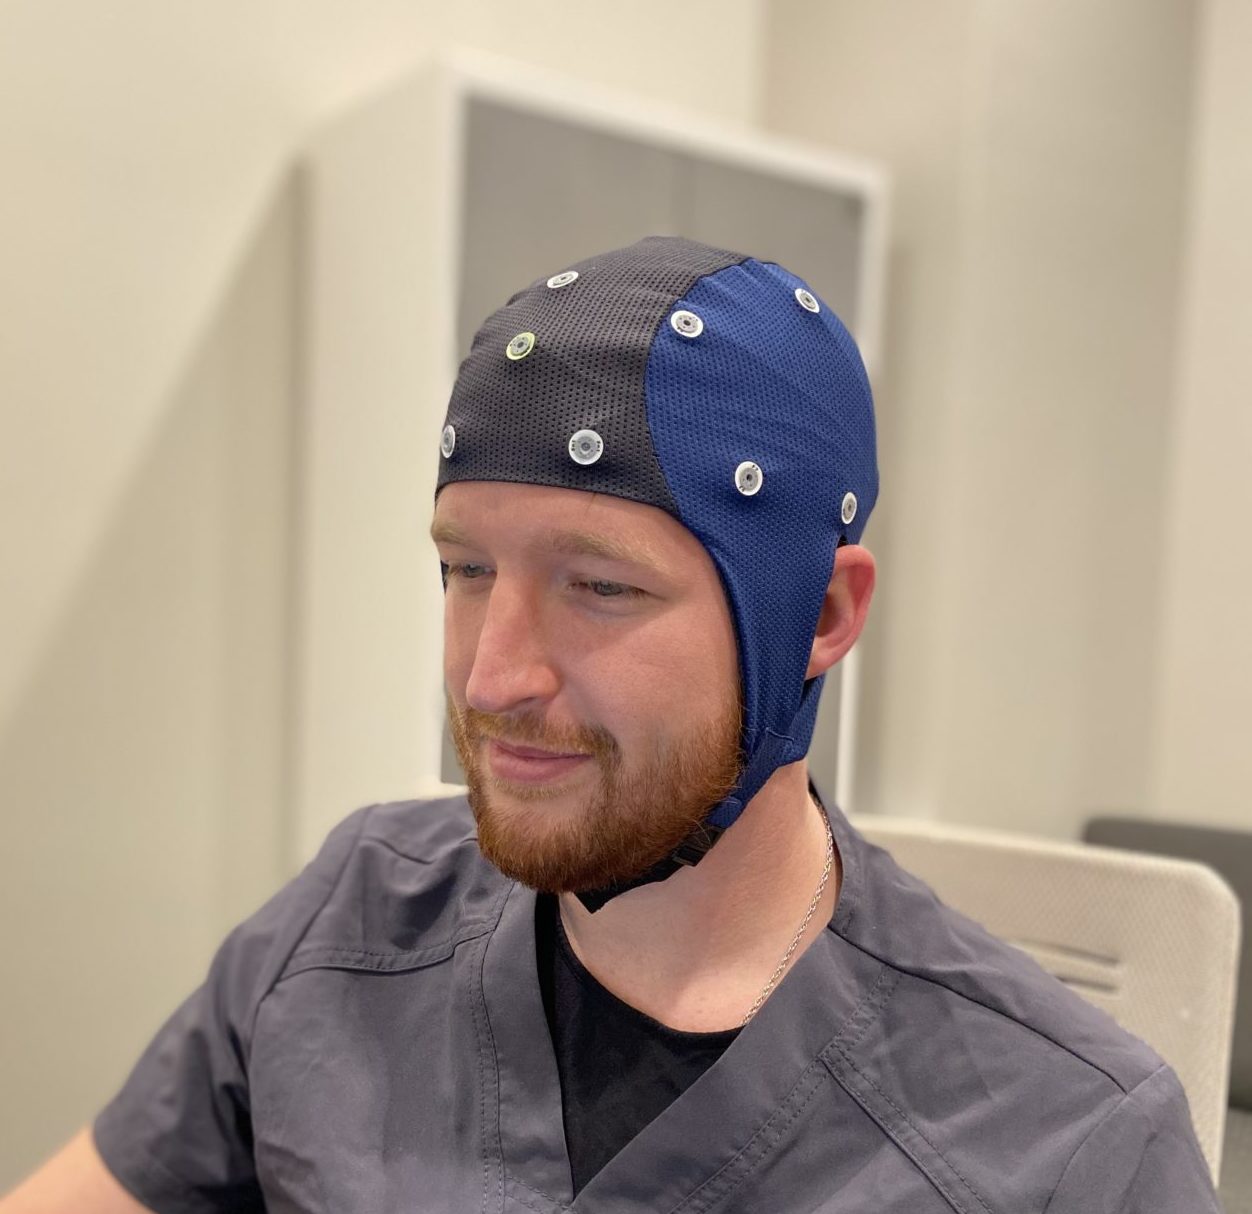 Patient Doing a Brainview Testing